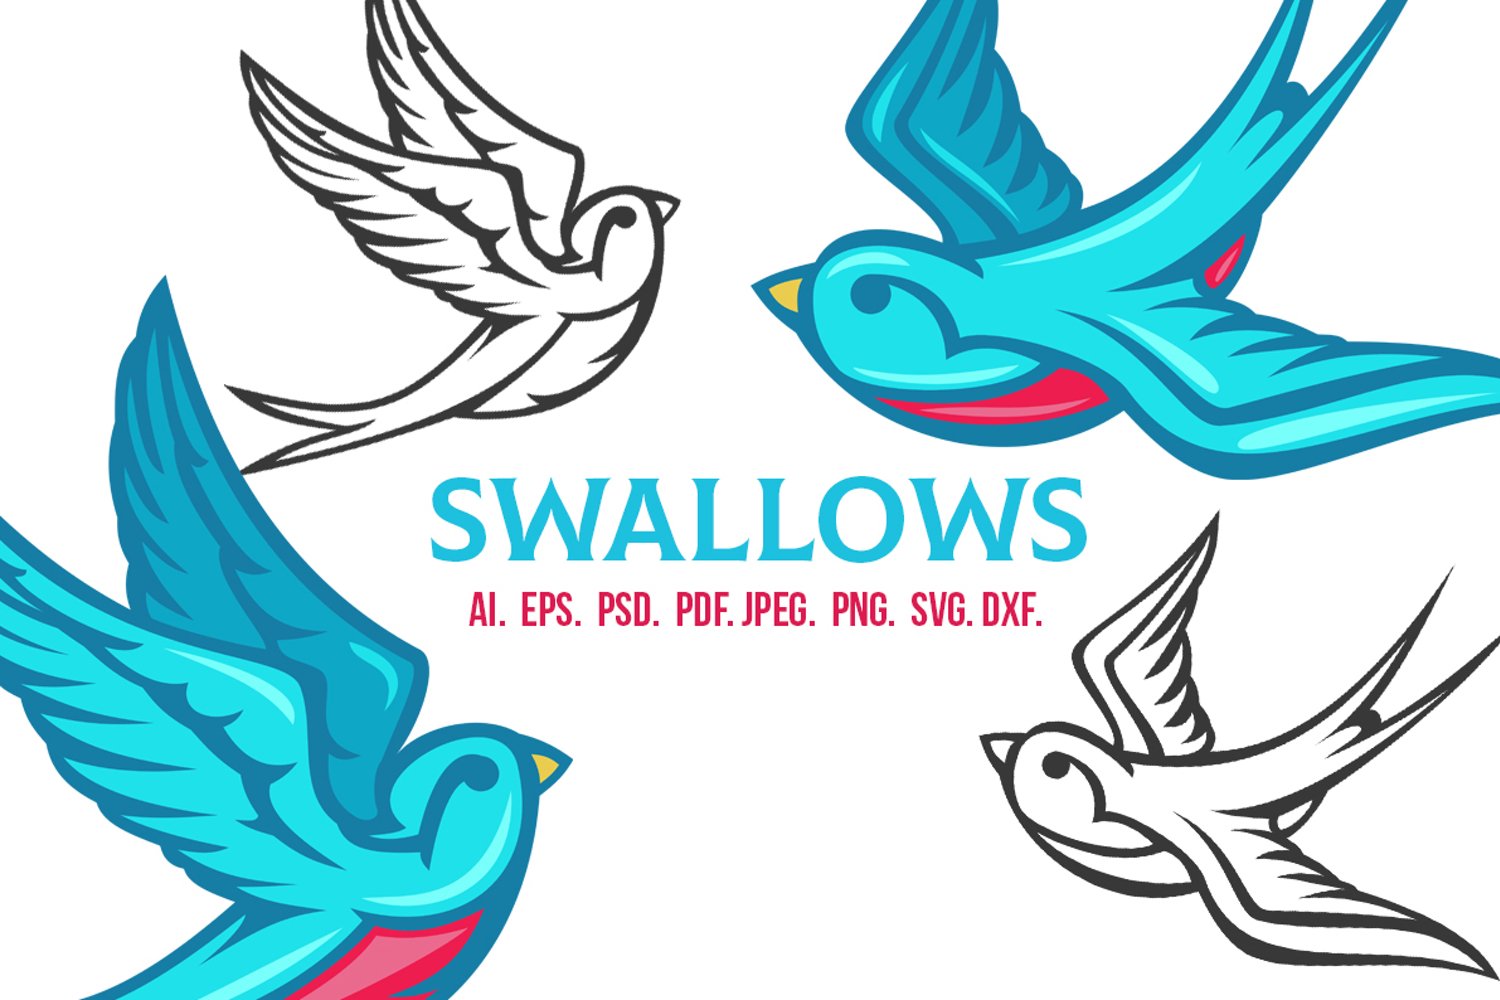 Cover image of Swallow illustration set.